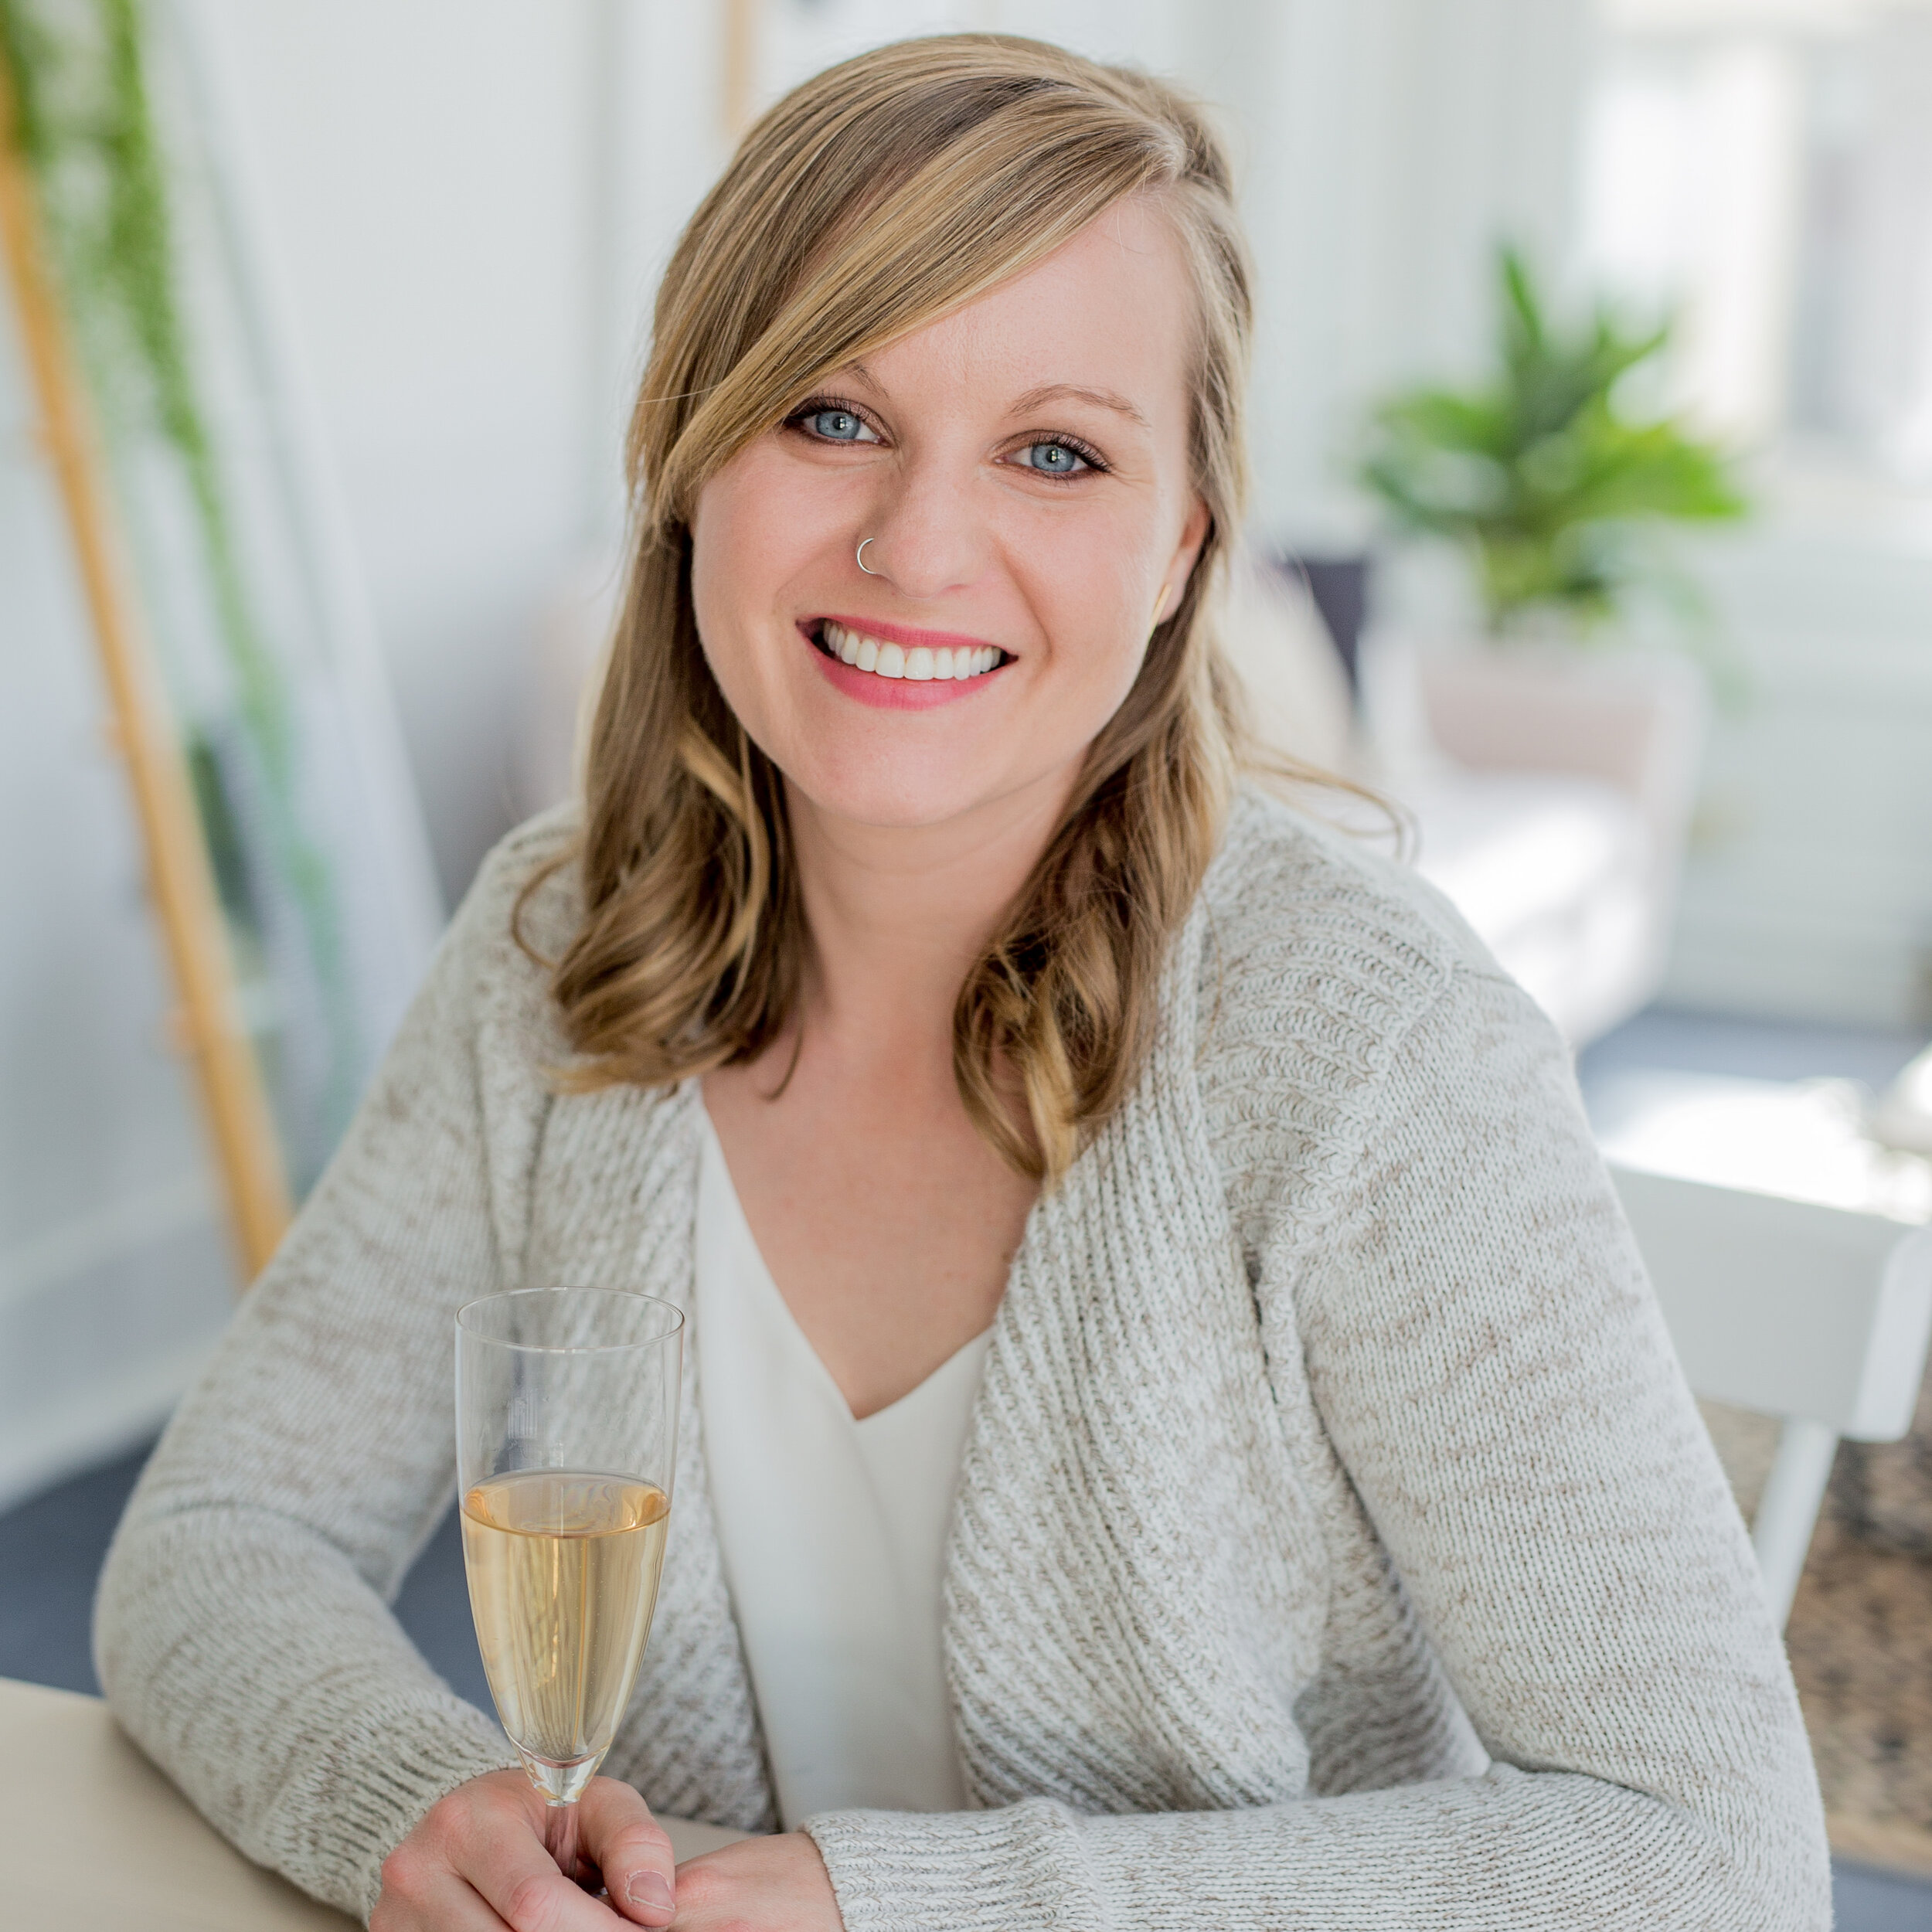 Meet Krista - As a wedding photographer, I have the privilege of ...